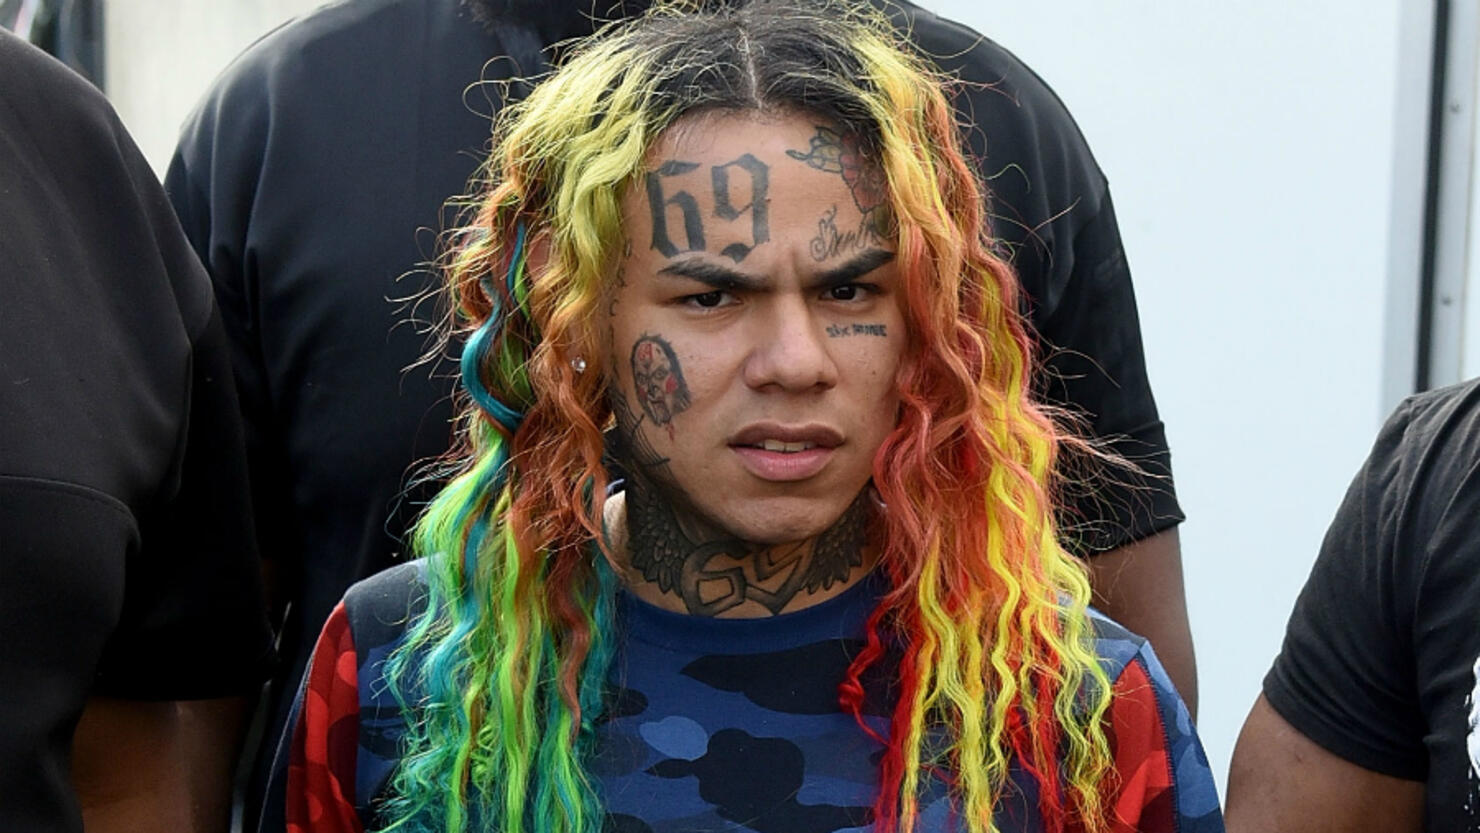 6ix9ine Teases New Music, Gets The Okay From Judge To Film Videos iHeart